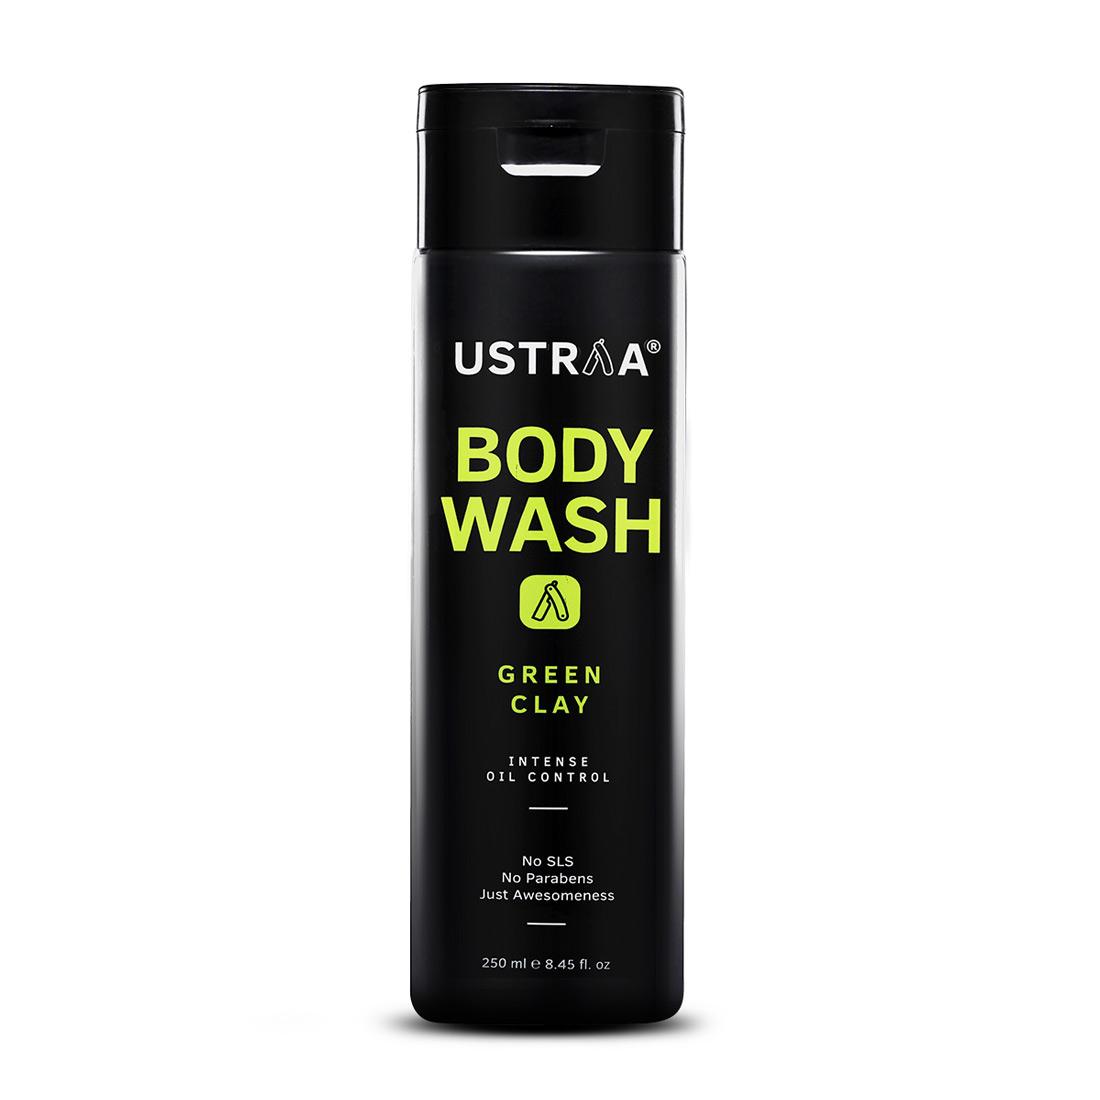 Ustraa Body Wash for Men 200 ml - With Green clay to Absorb excess oil and Detoxify skin

